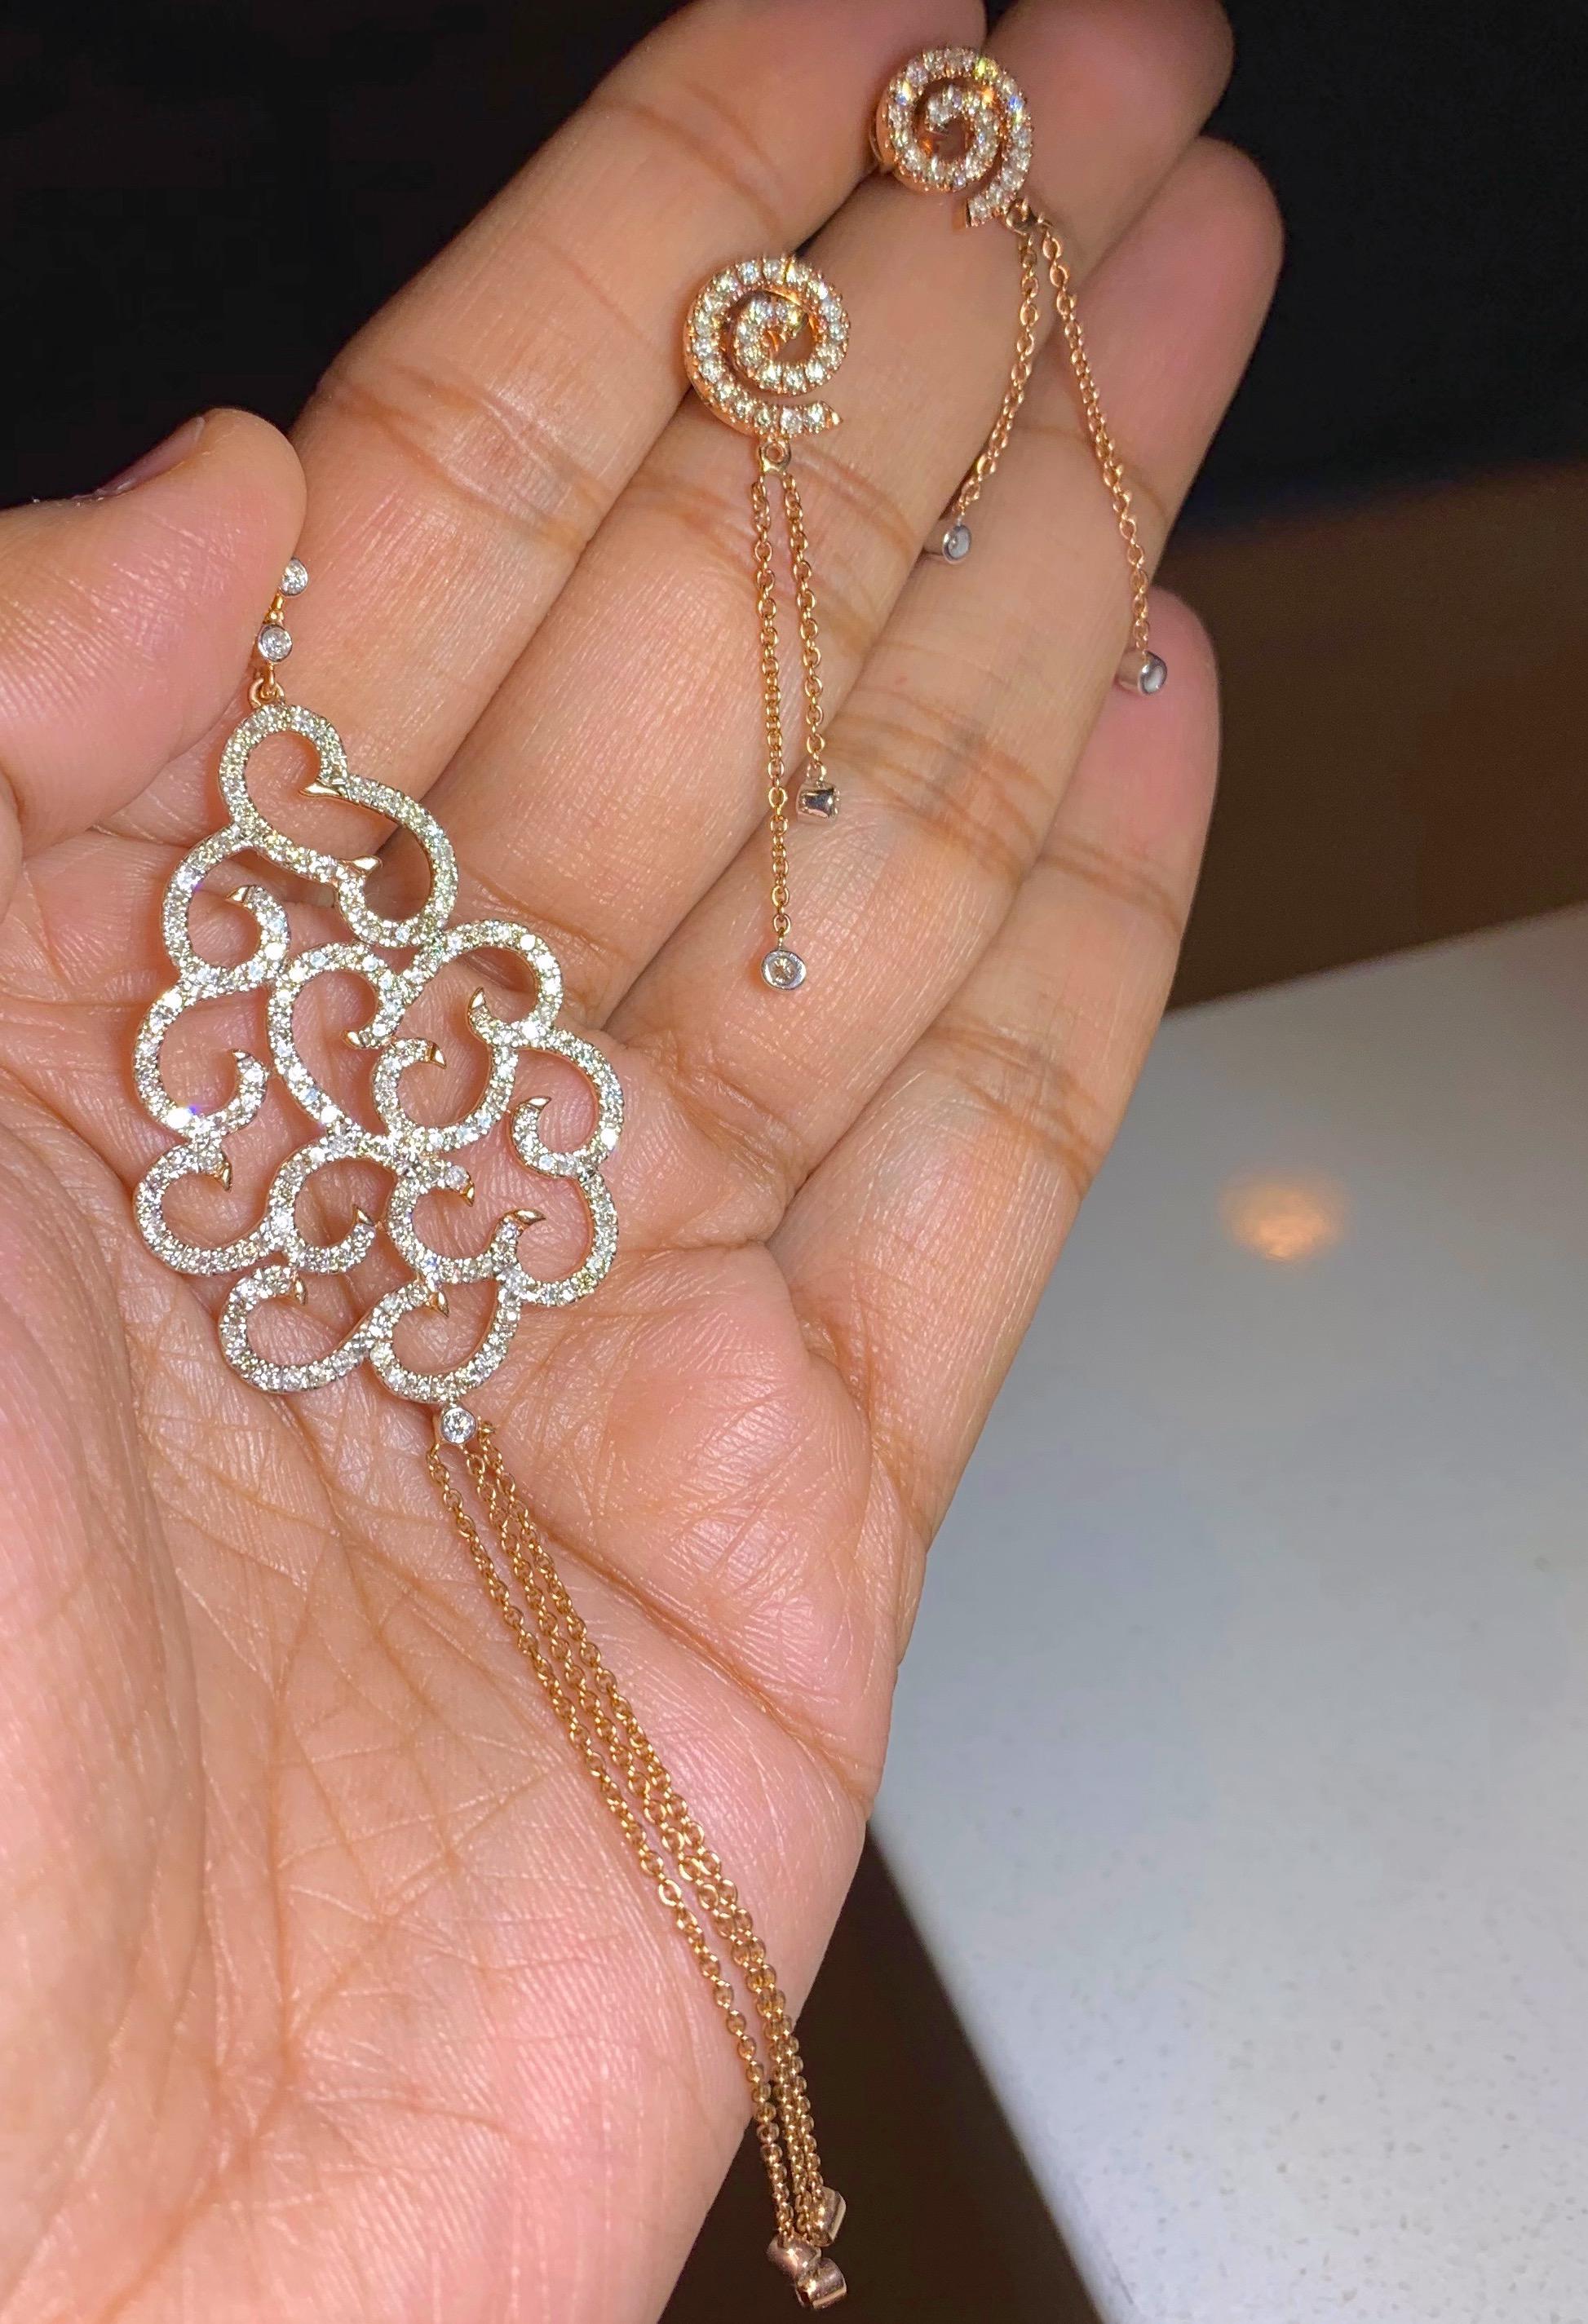 Diamond Spirals Necklace in 18 Karat Rose Gold In New Condition For Sale In Fort Collins, CO